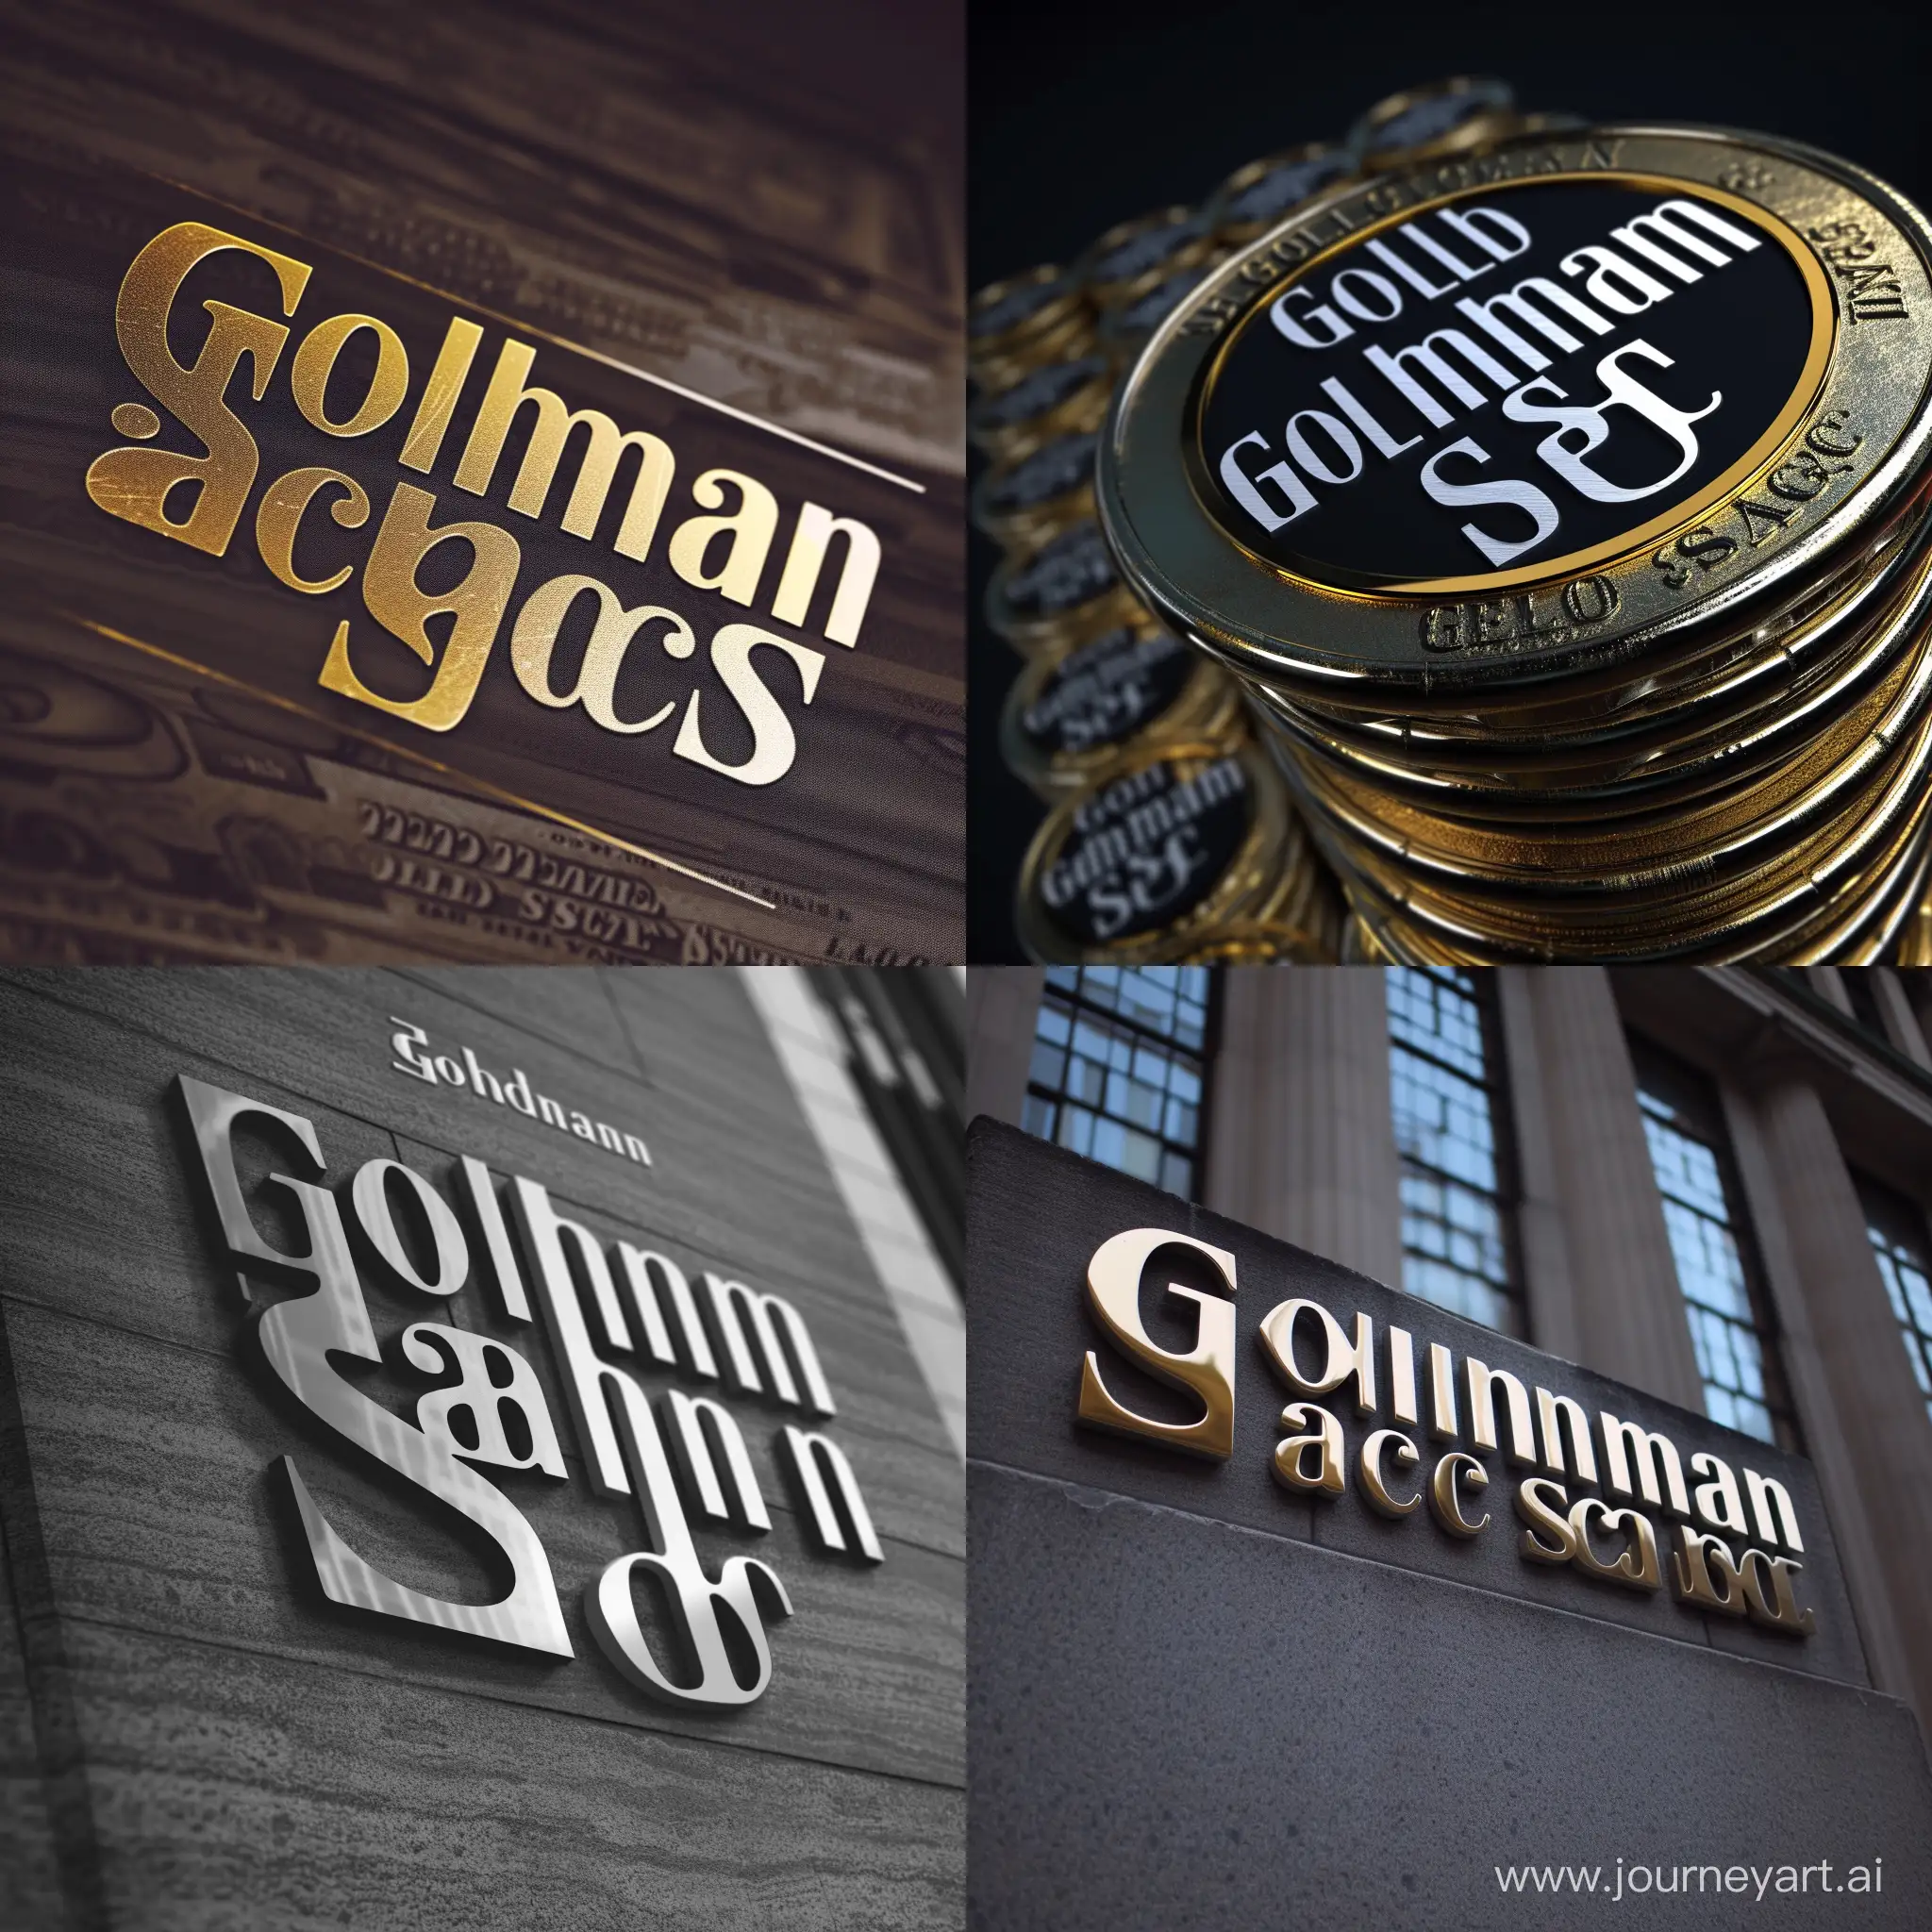 Goldman-Stacks-Logo-with-Version-6-in-11-Aspect-Ratio